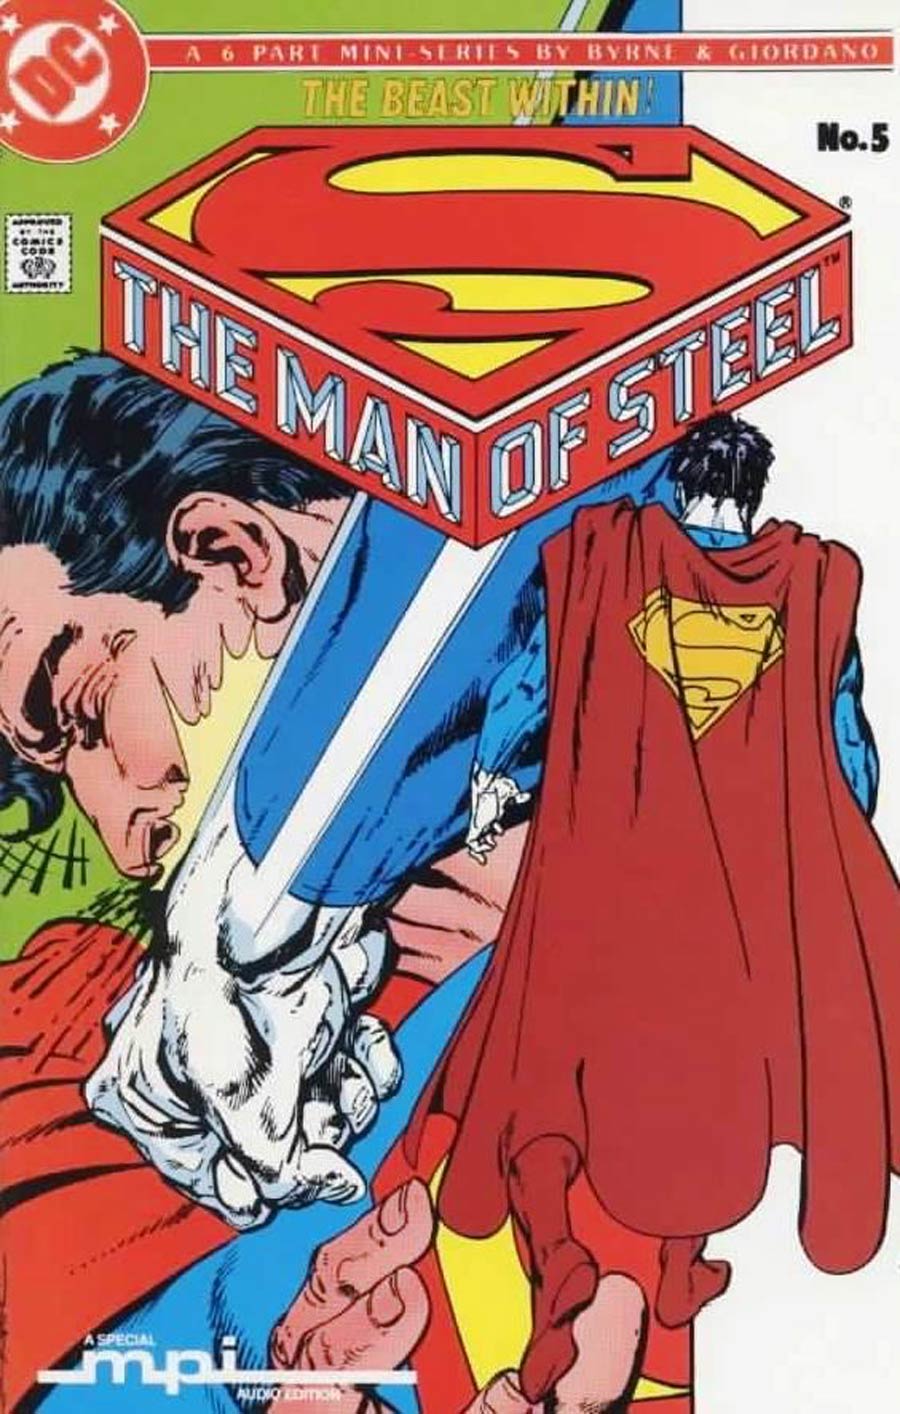 Man Of Steel #5 Cover B MPI Audio Edition With Cassette Tape